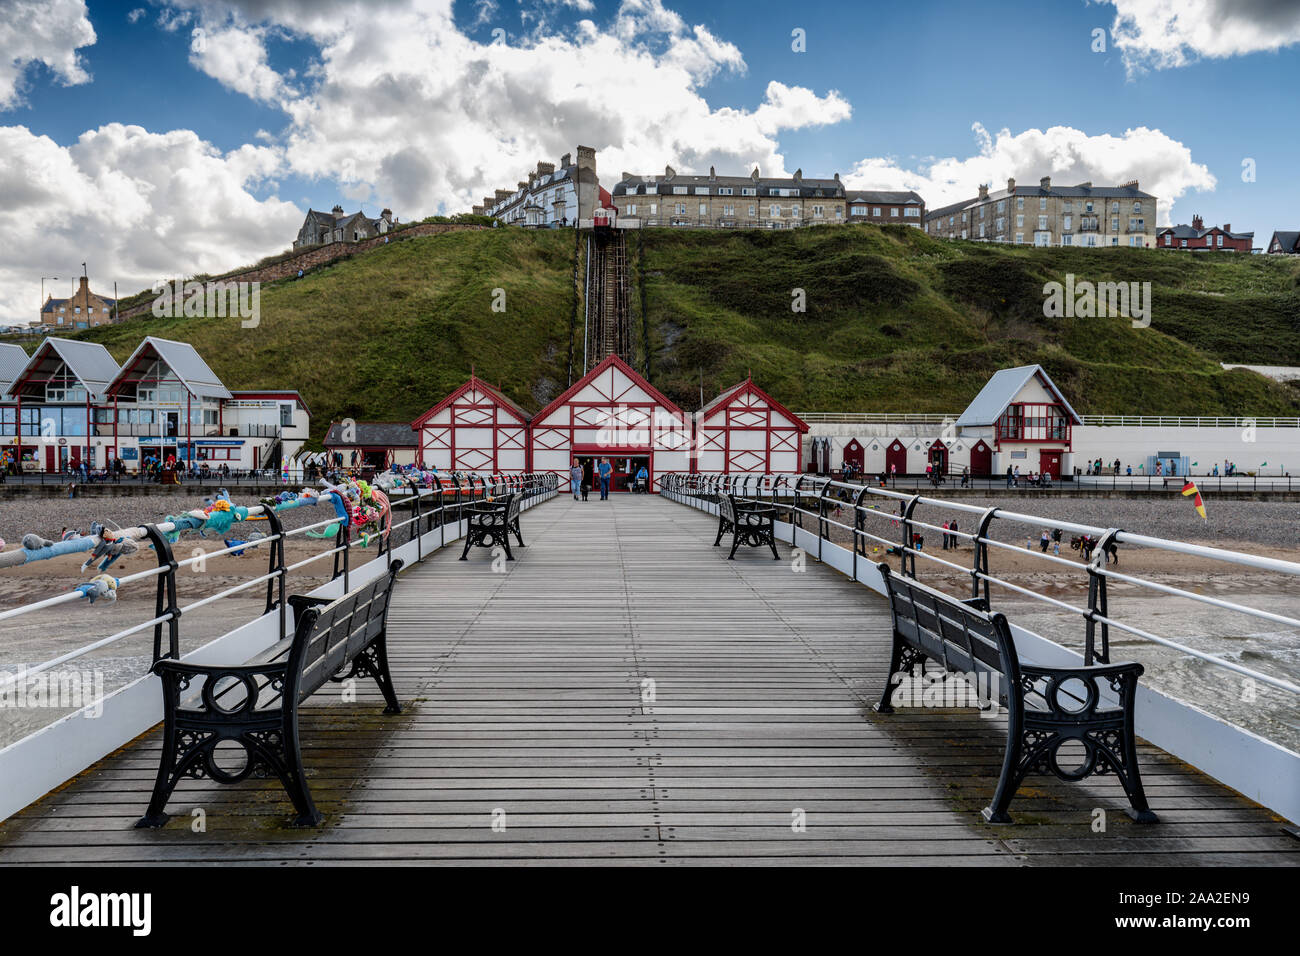 Saltburn Pier, located in Saltburn-by-the-Sea, built in 1869, the only remaining pleasure pier on the Yorkshire and North East coast of England Stock Photo